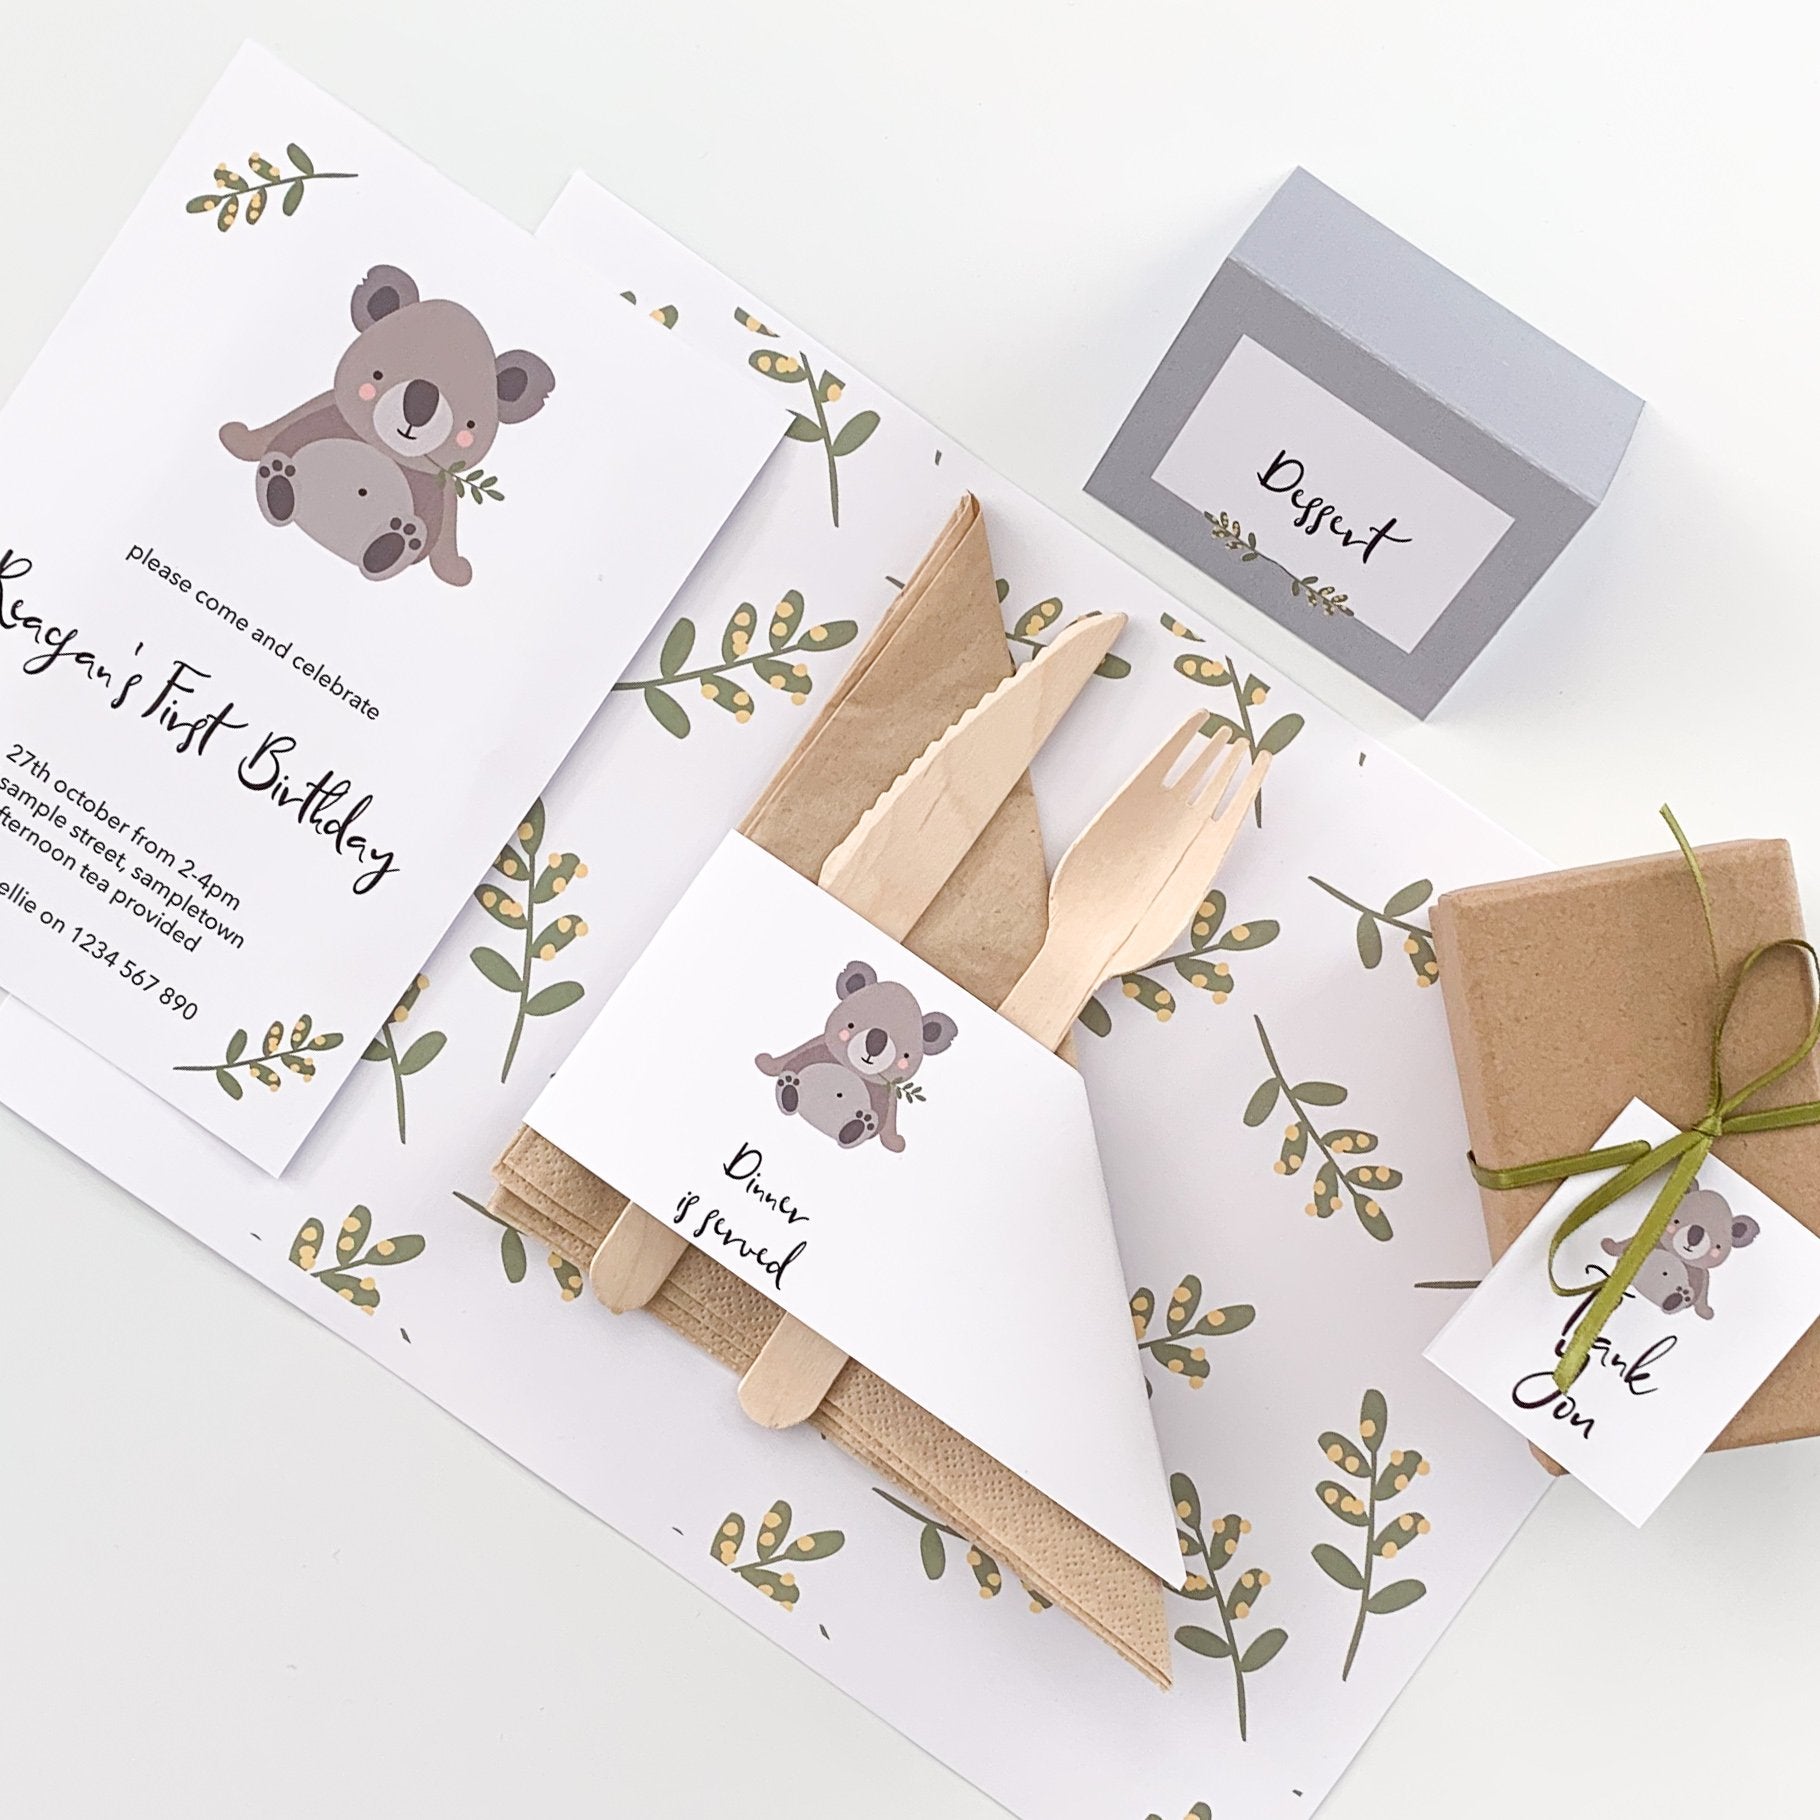 Aussie Cuties with Koala Printable Party Decoration on display - The Printable Place